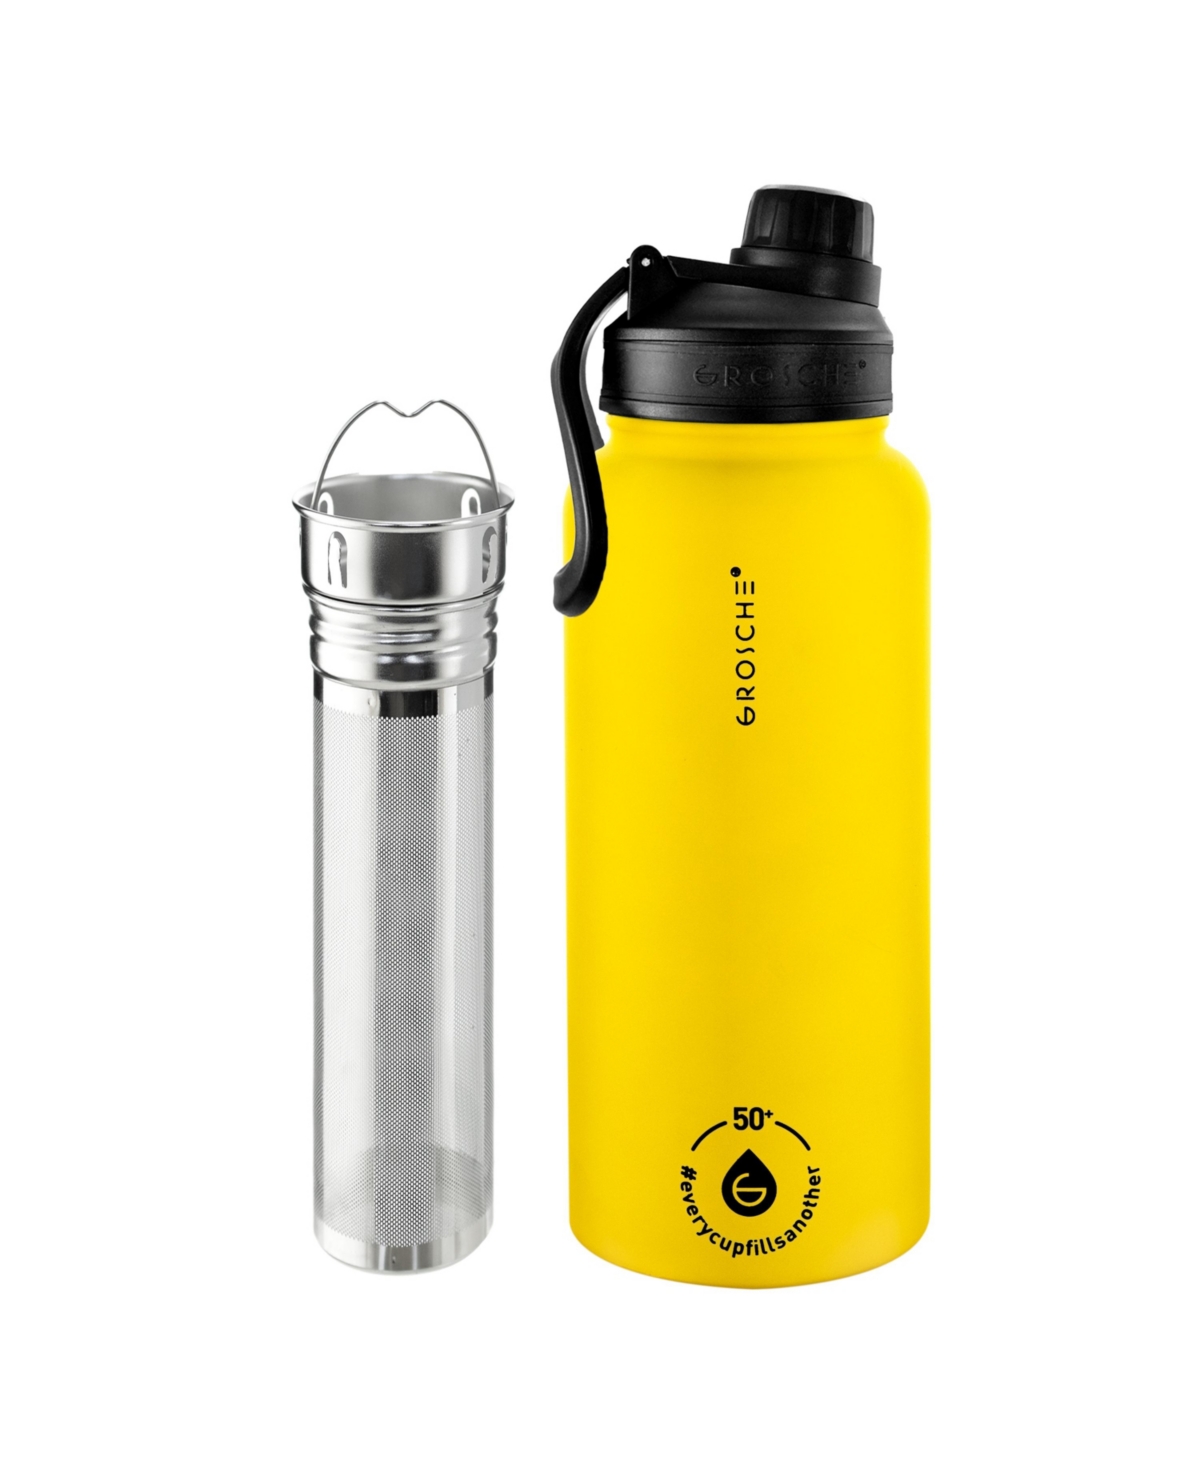 Grosche Chicago Steel Insulated Tea Infusion Flask, Tea And Coffee Tumbler, 32 Fluid oz In Honey Yellow